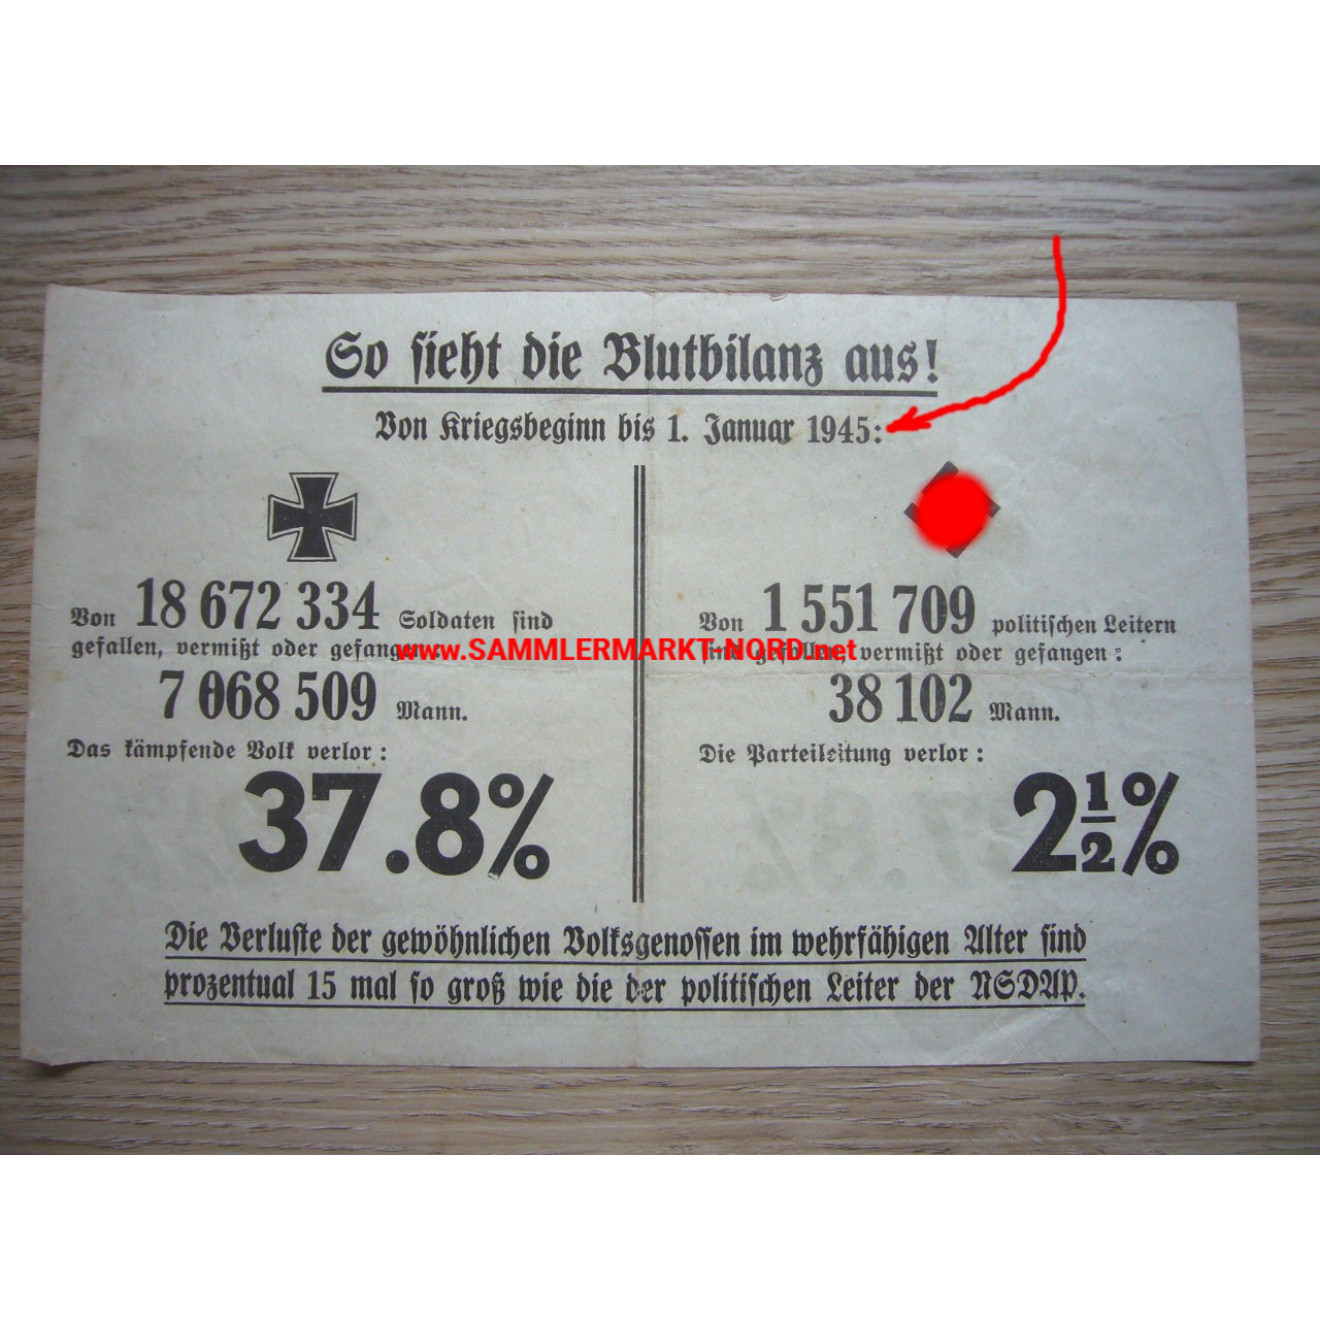 Allied leaflet, January 1945 - This is what the blood balance looks like